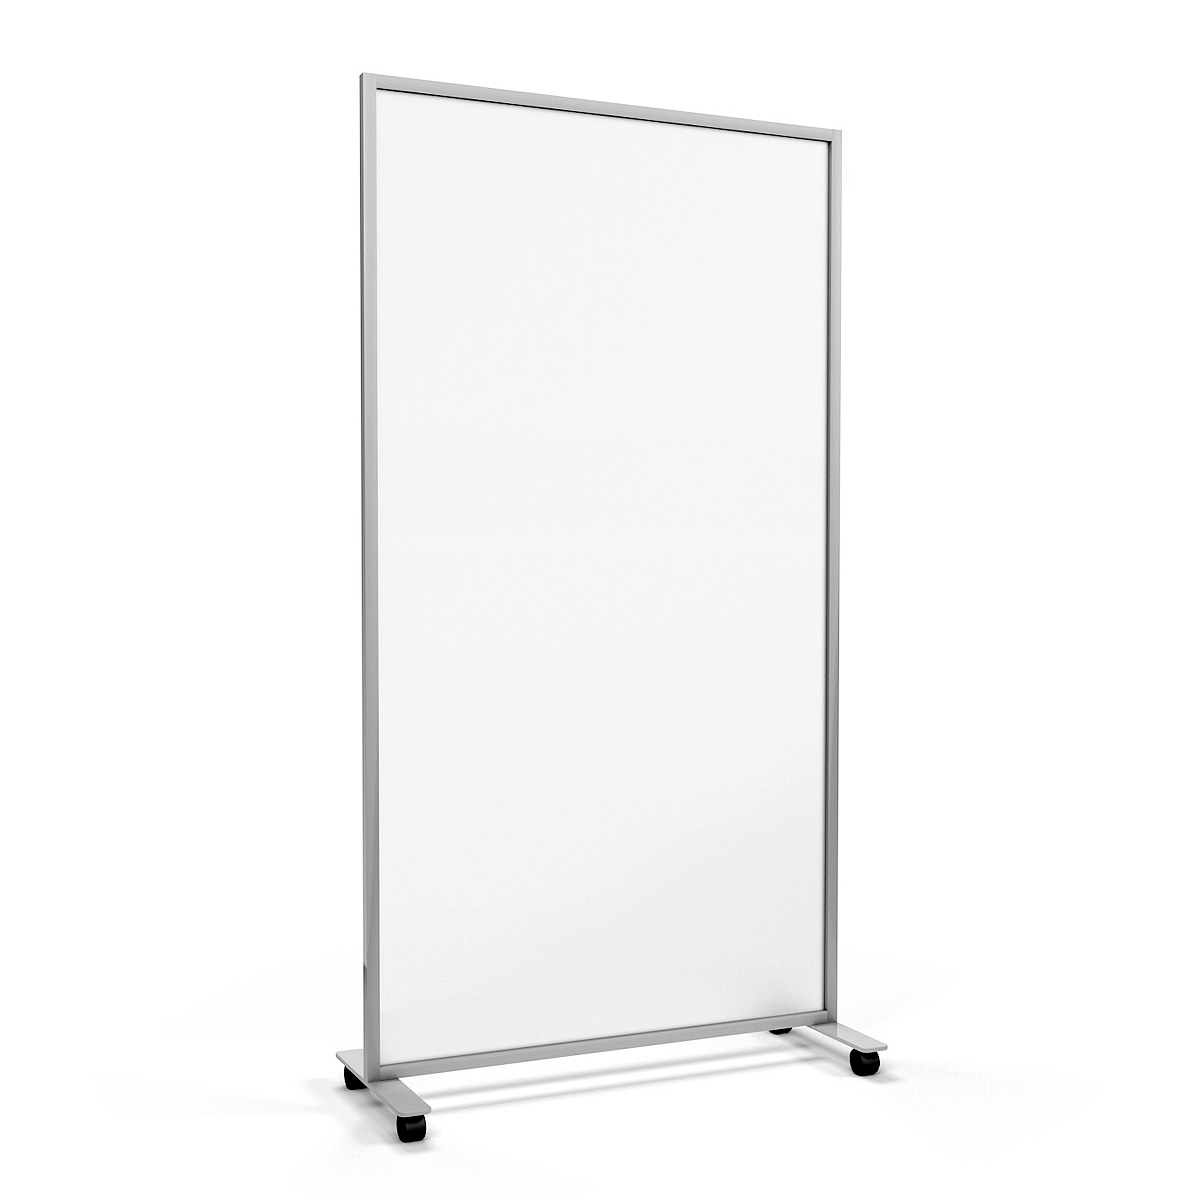 ACHOO® Frosted Perspex® Mobile Office Screens With Frosted Acrylic Surface